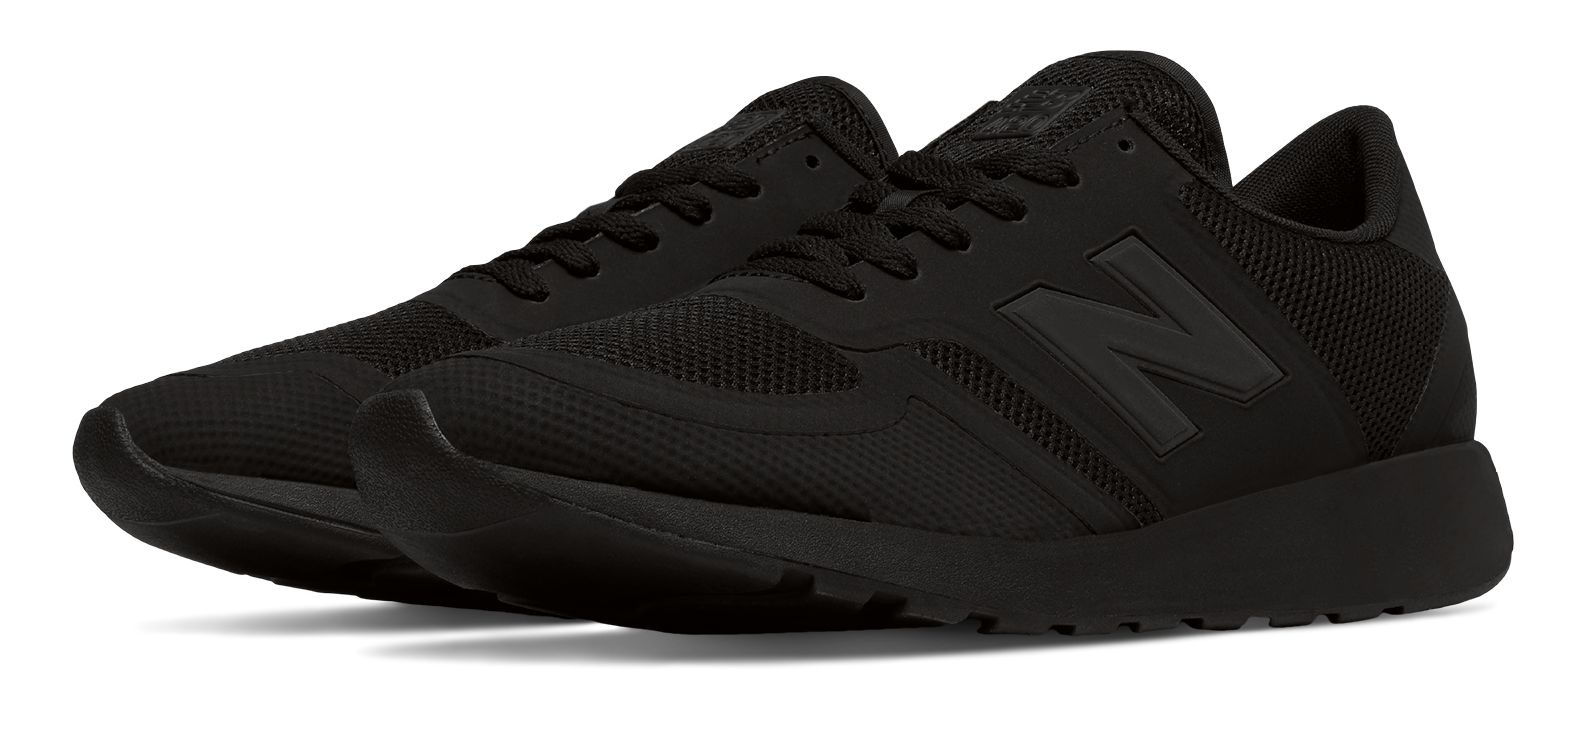 nb 420 re engineered review